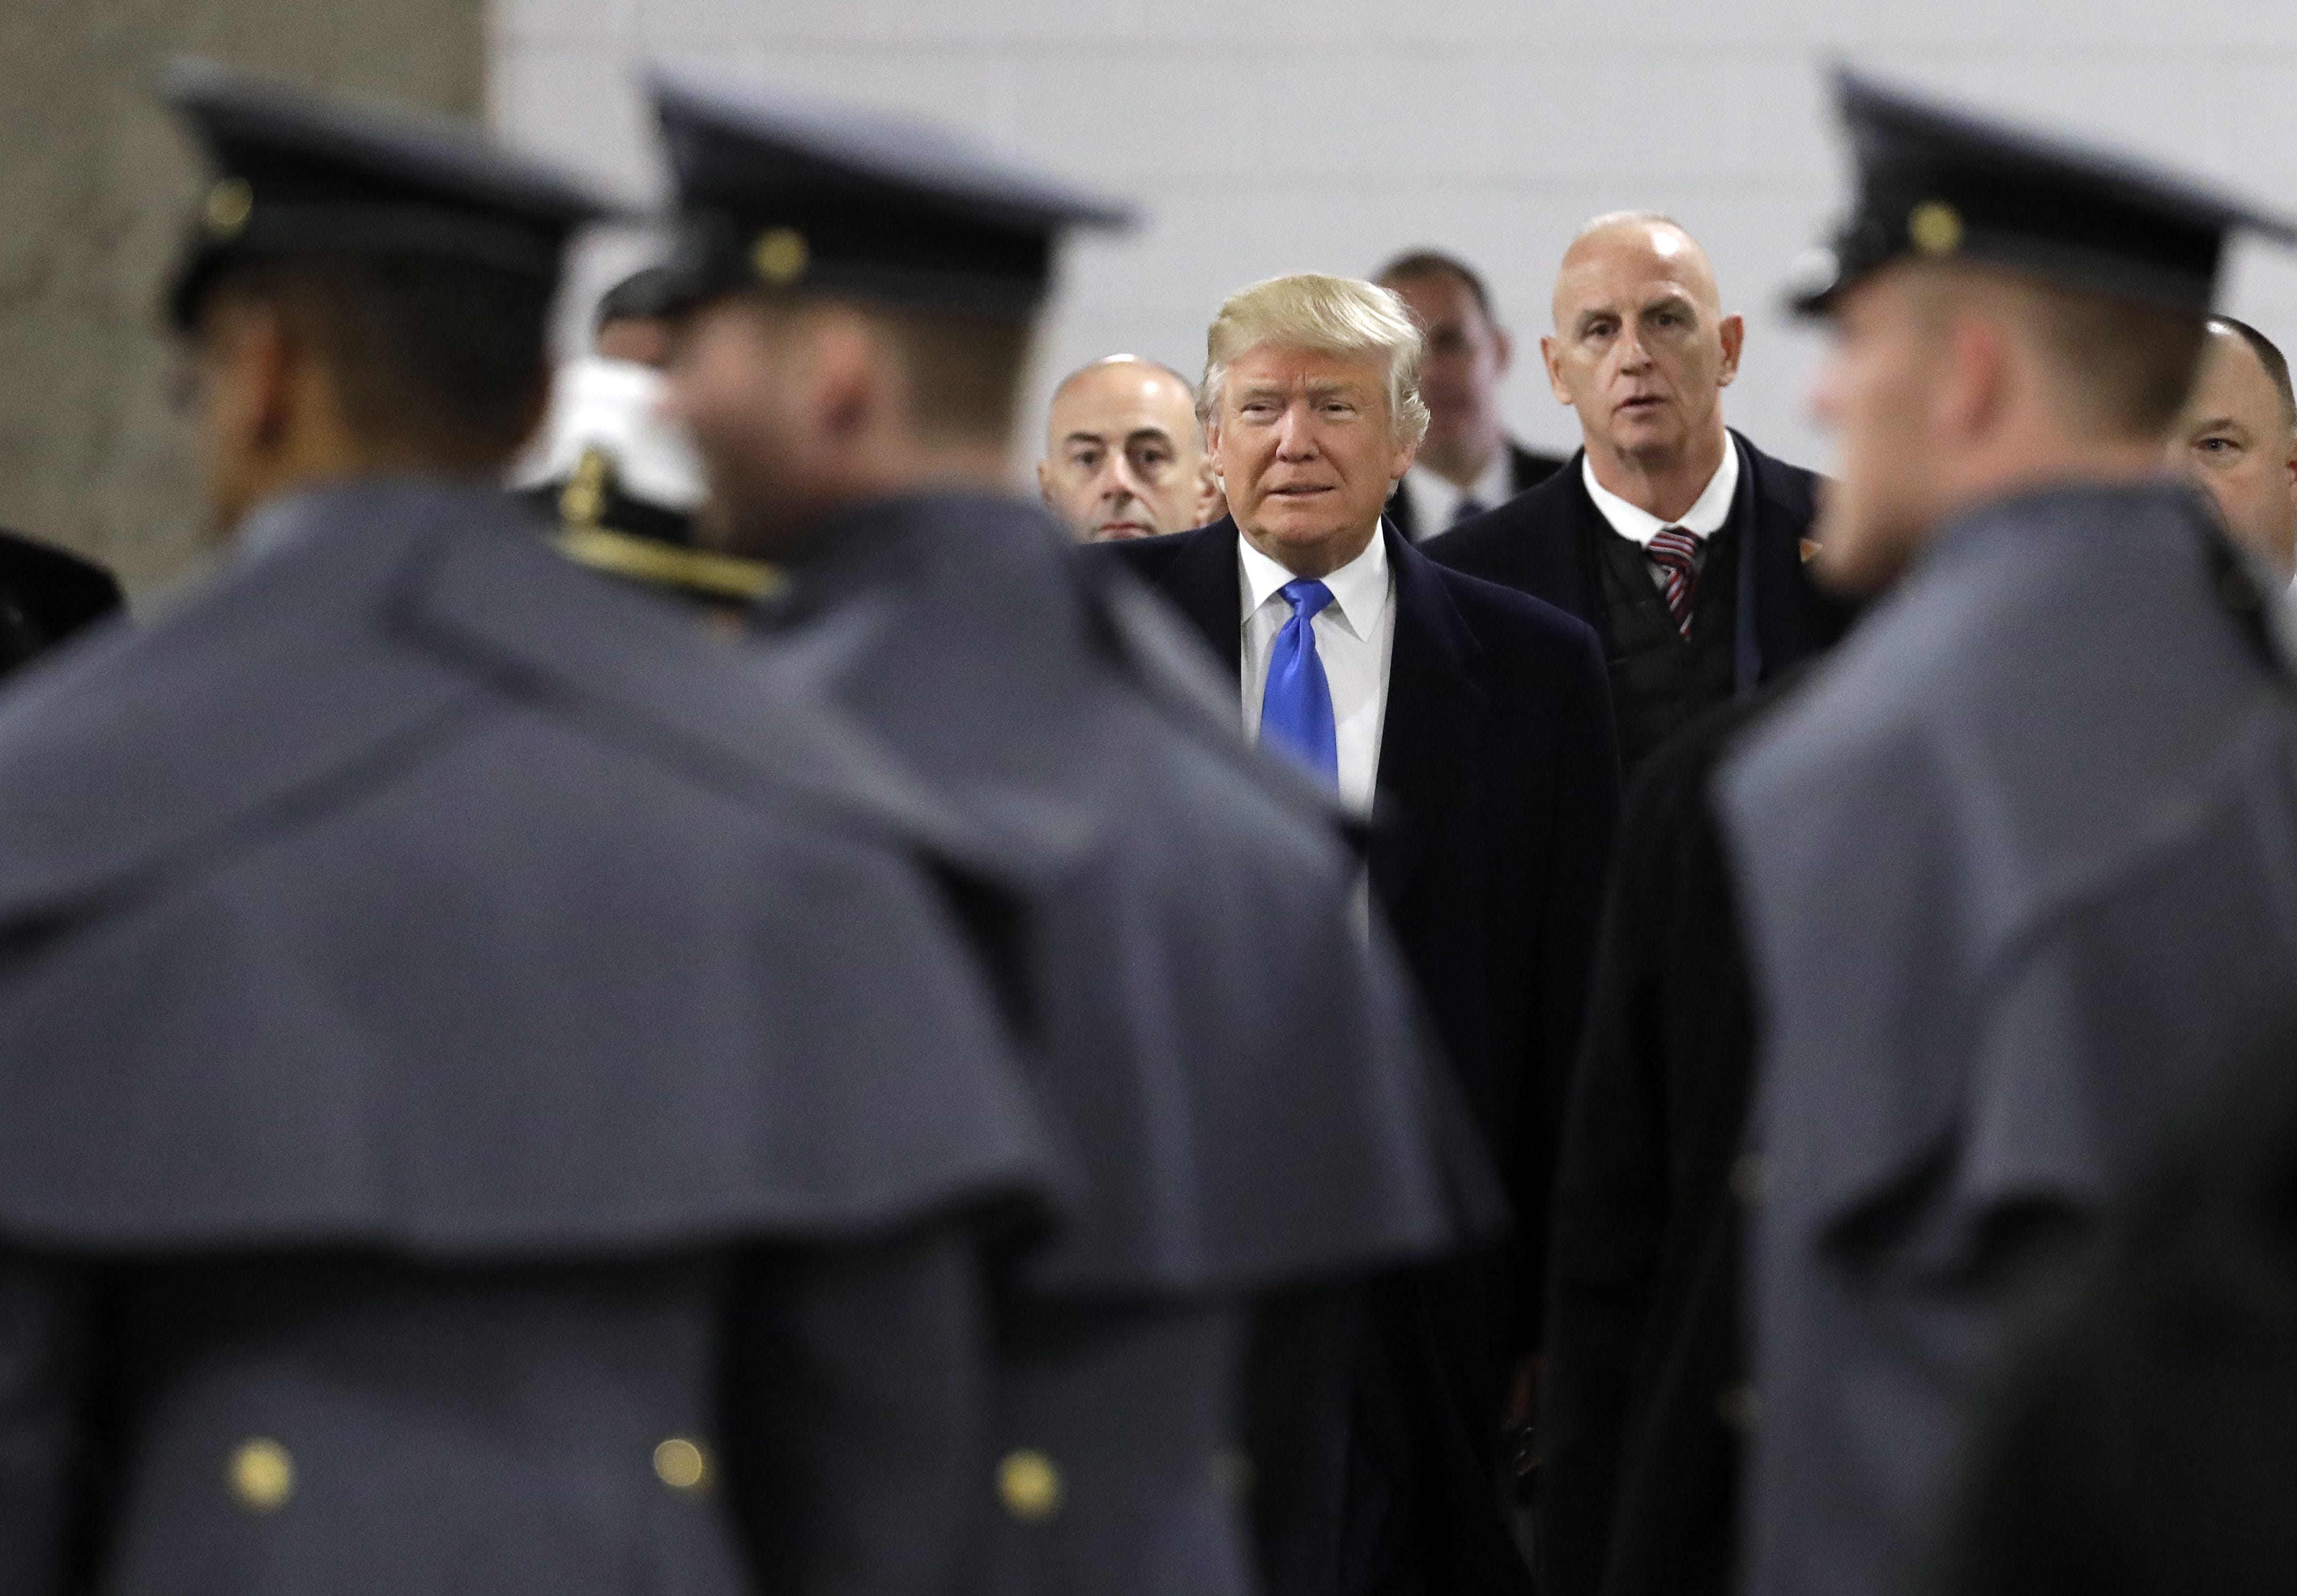 President-elect Donald Trump walks up to greet Army Cadets and Navy Midshipmen before the Army-Navy NCAA college football game in Baltimore, Saturday, Dec. 10, 2016.